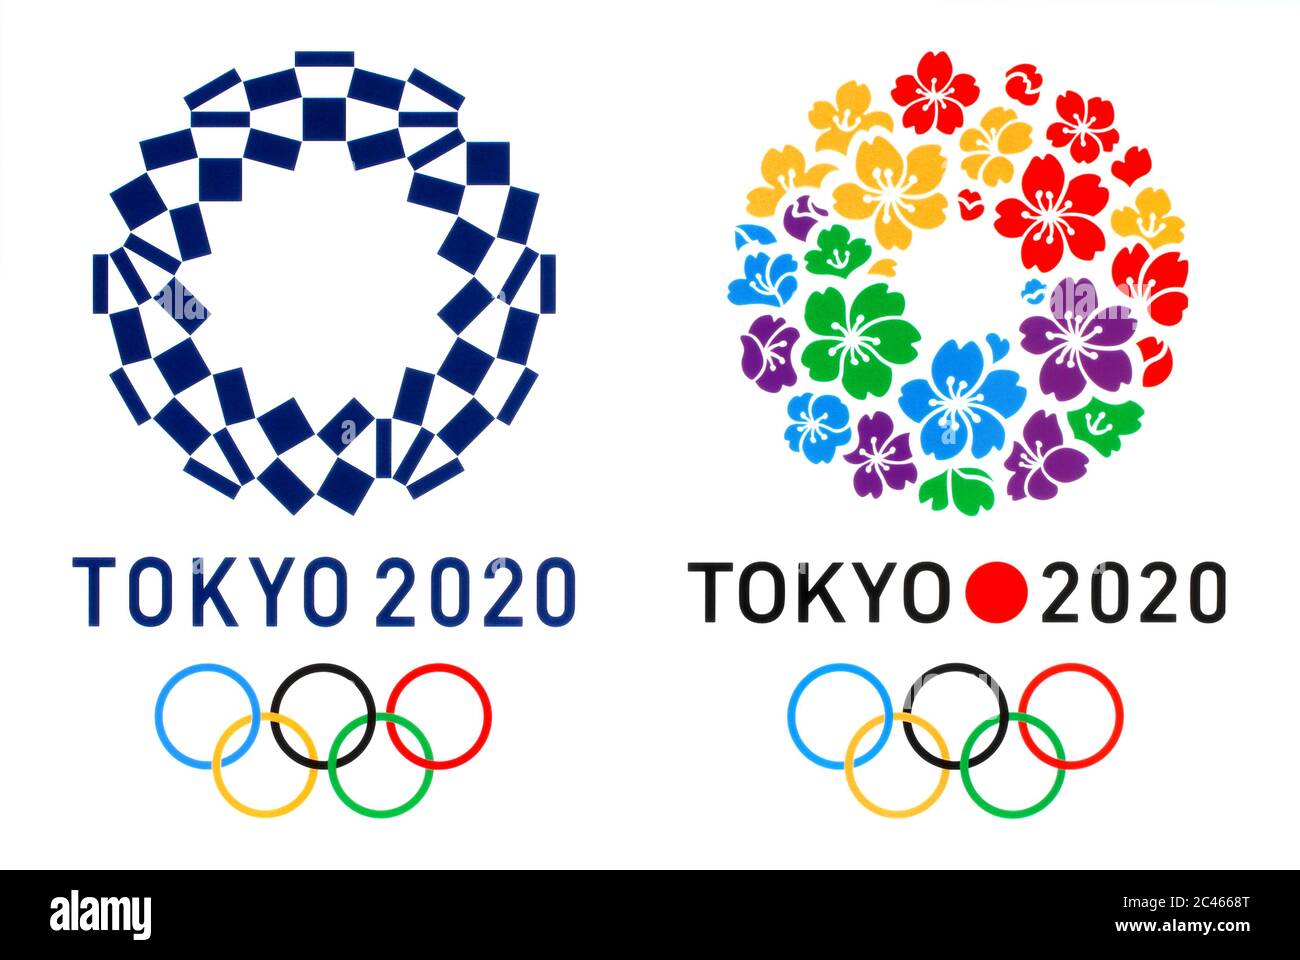 Kiev, Ukraine - October 04, 2019: Official logo of the 2020 Summer Olympic Games in Tokyo, and logo of Tokyo Candidate City, printed on paper Stock Photo